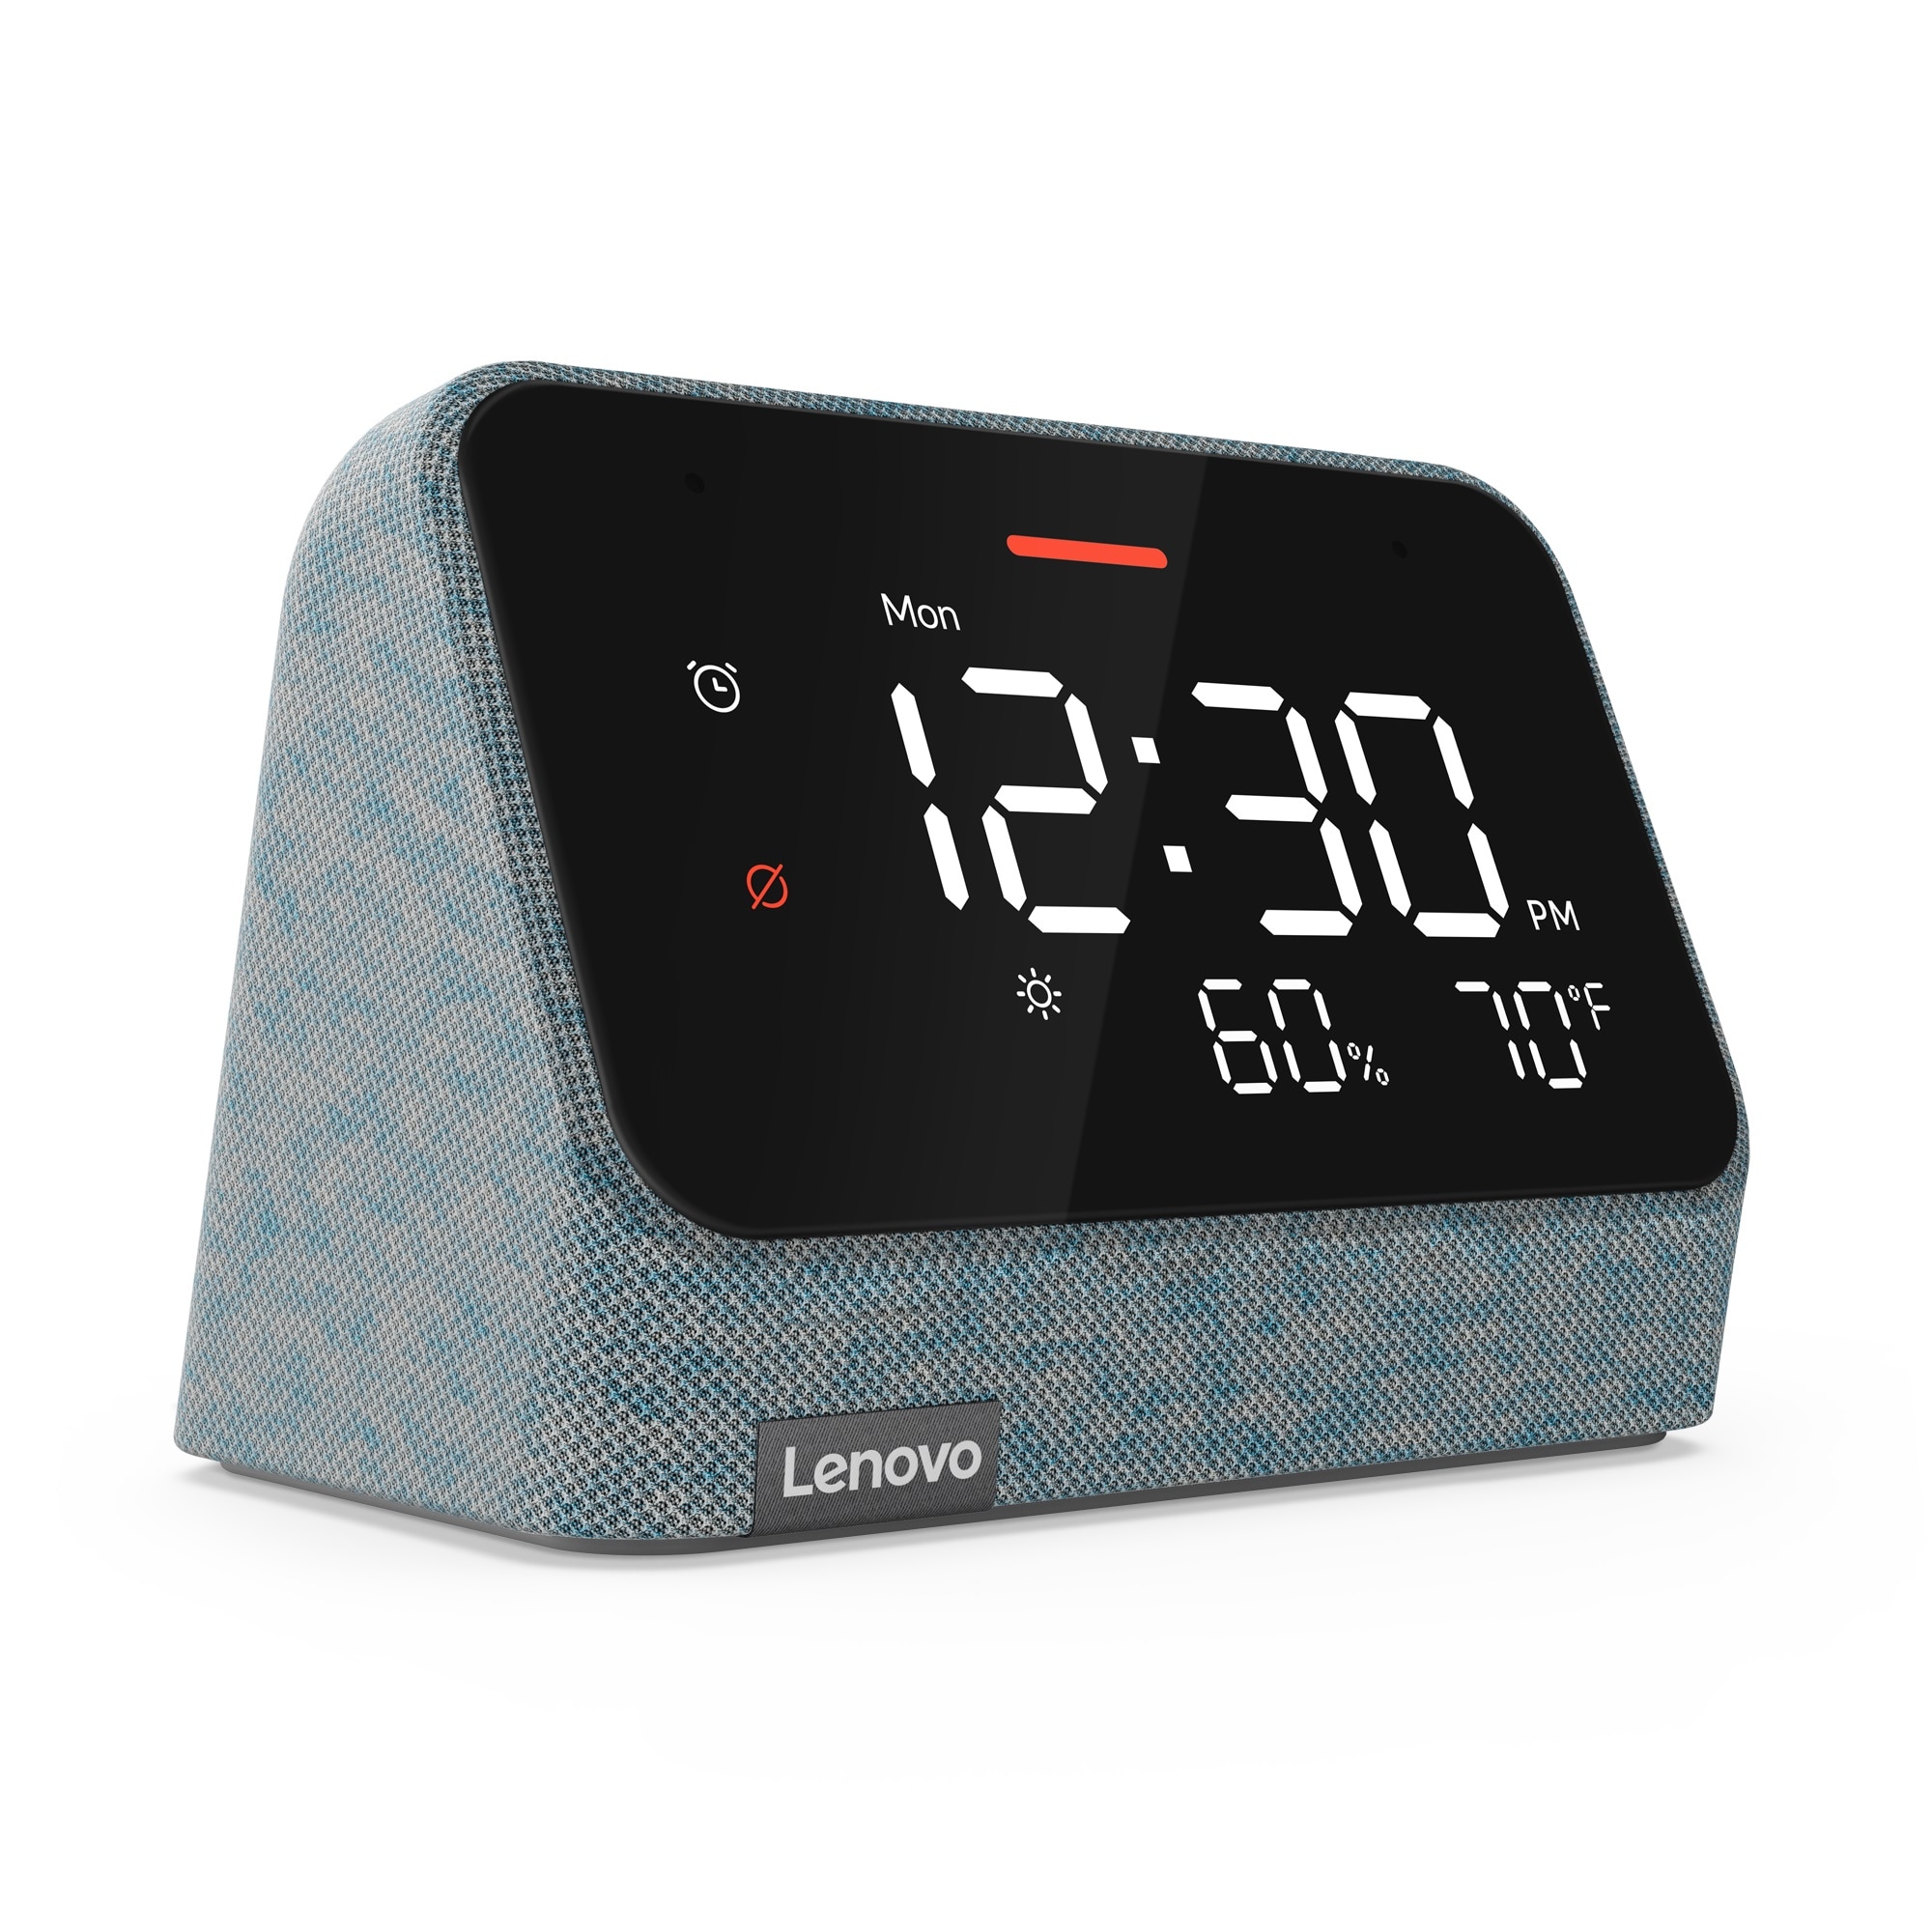 Lowe's, Lenovo Smart Clock Essential with Alexa Built-in Misty Blue. $14.99, free pickup